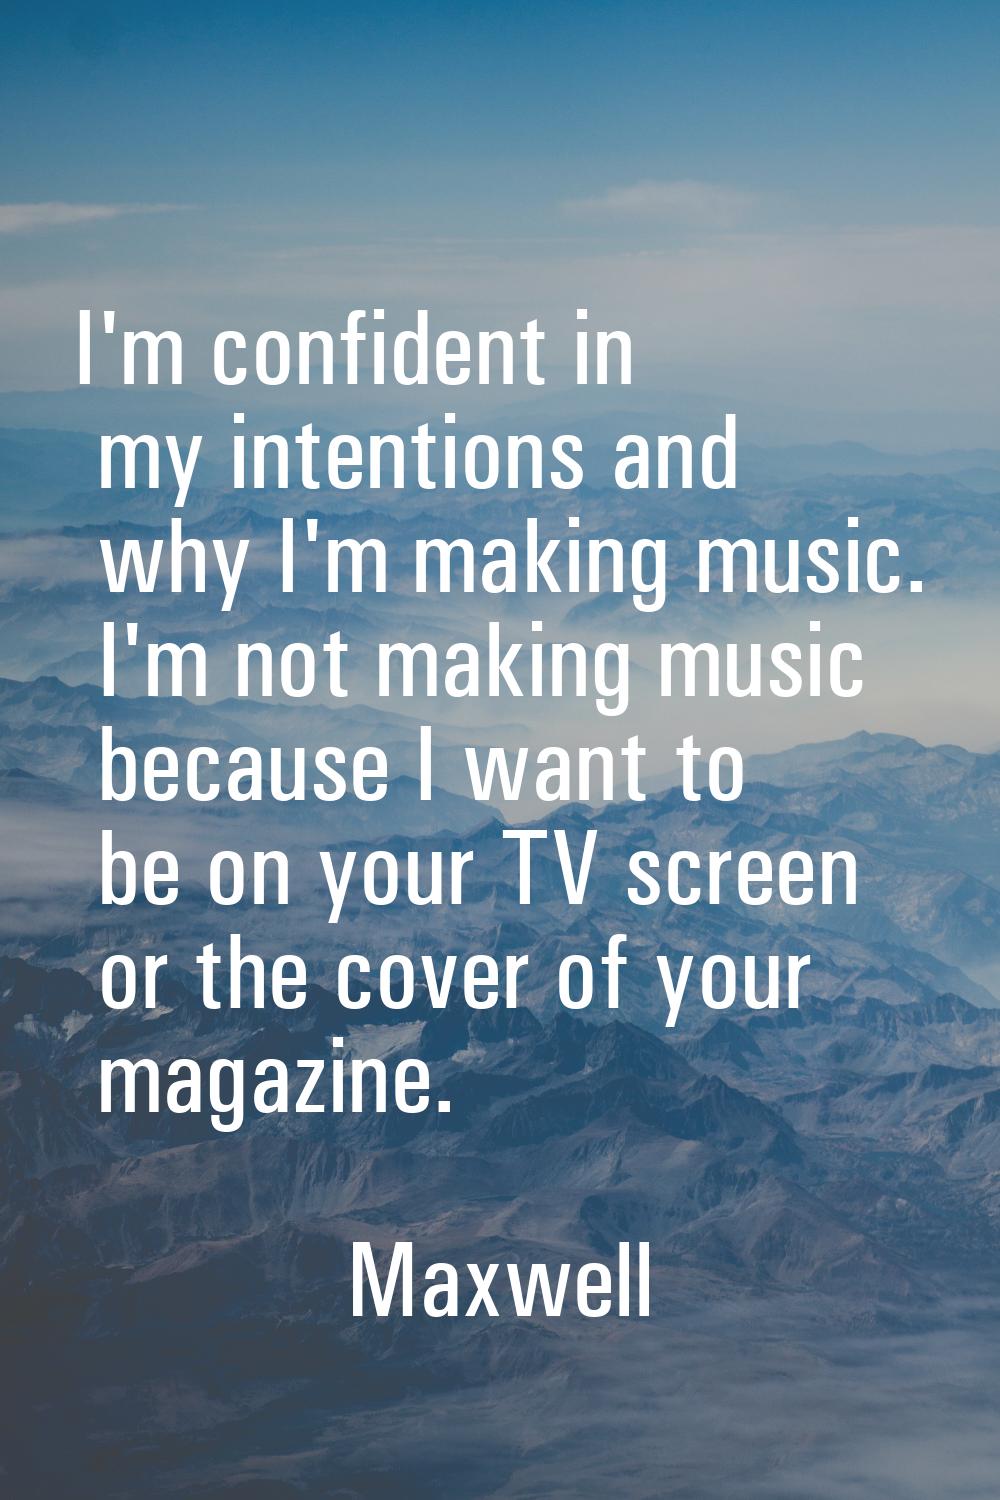 I'm confident in my intentions and why I'm making music. I'm not making music because I want to be 